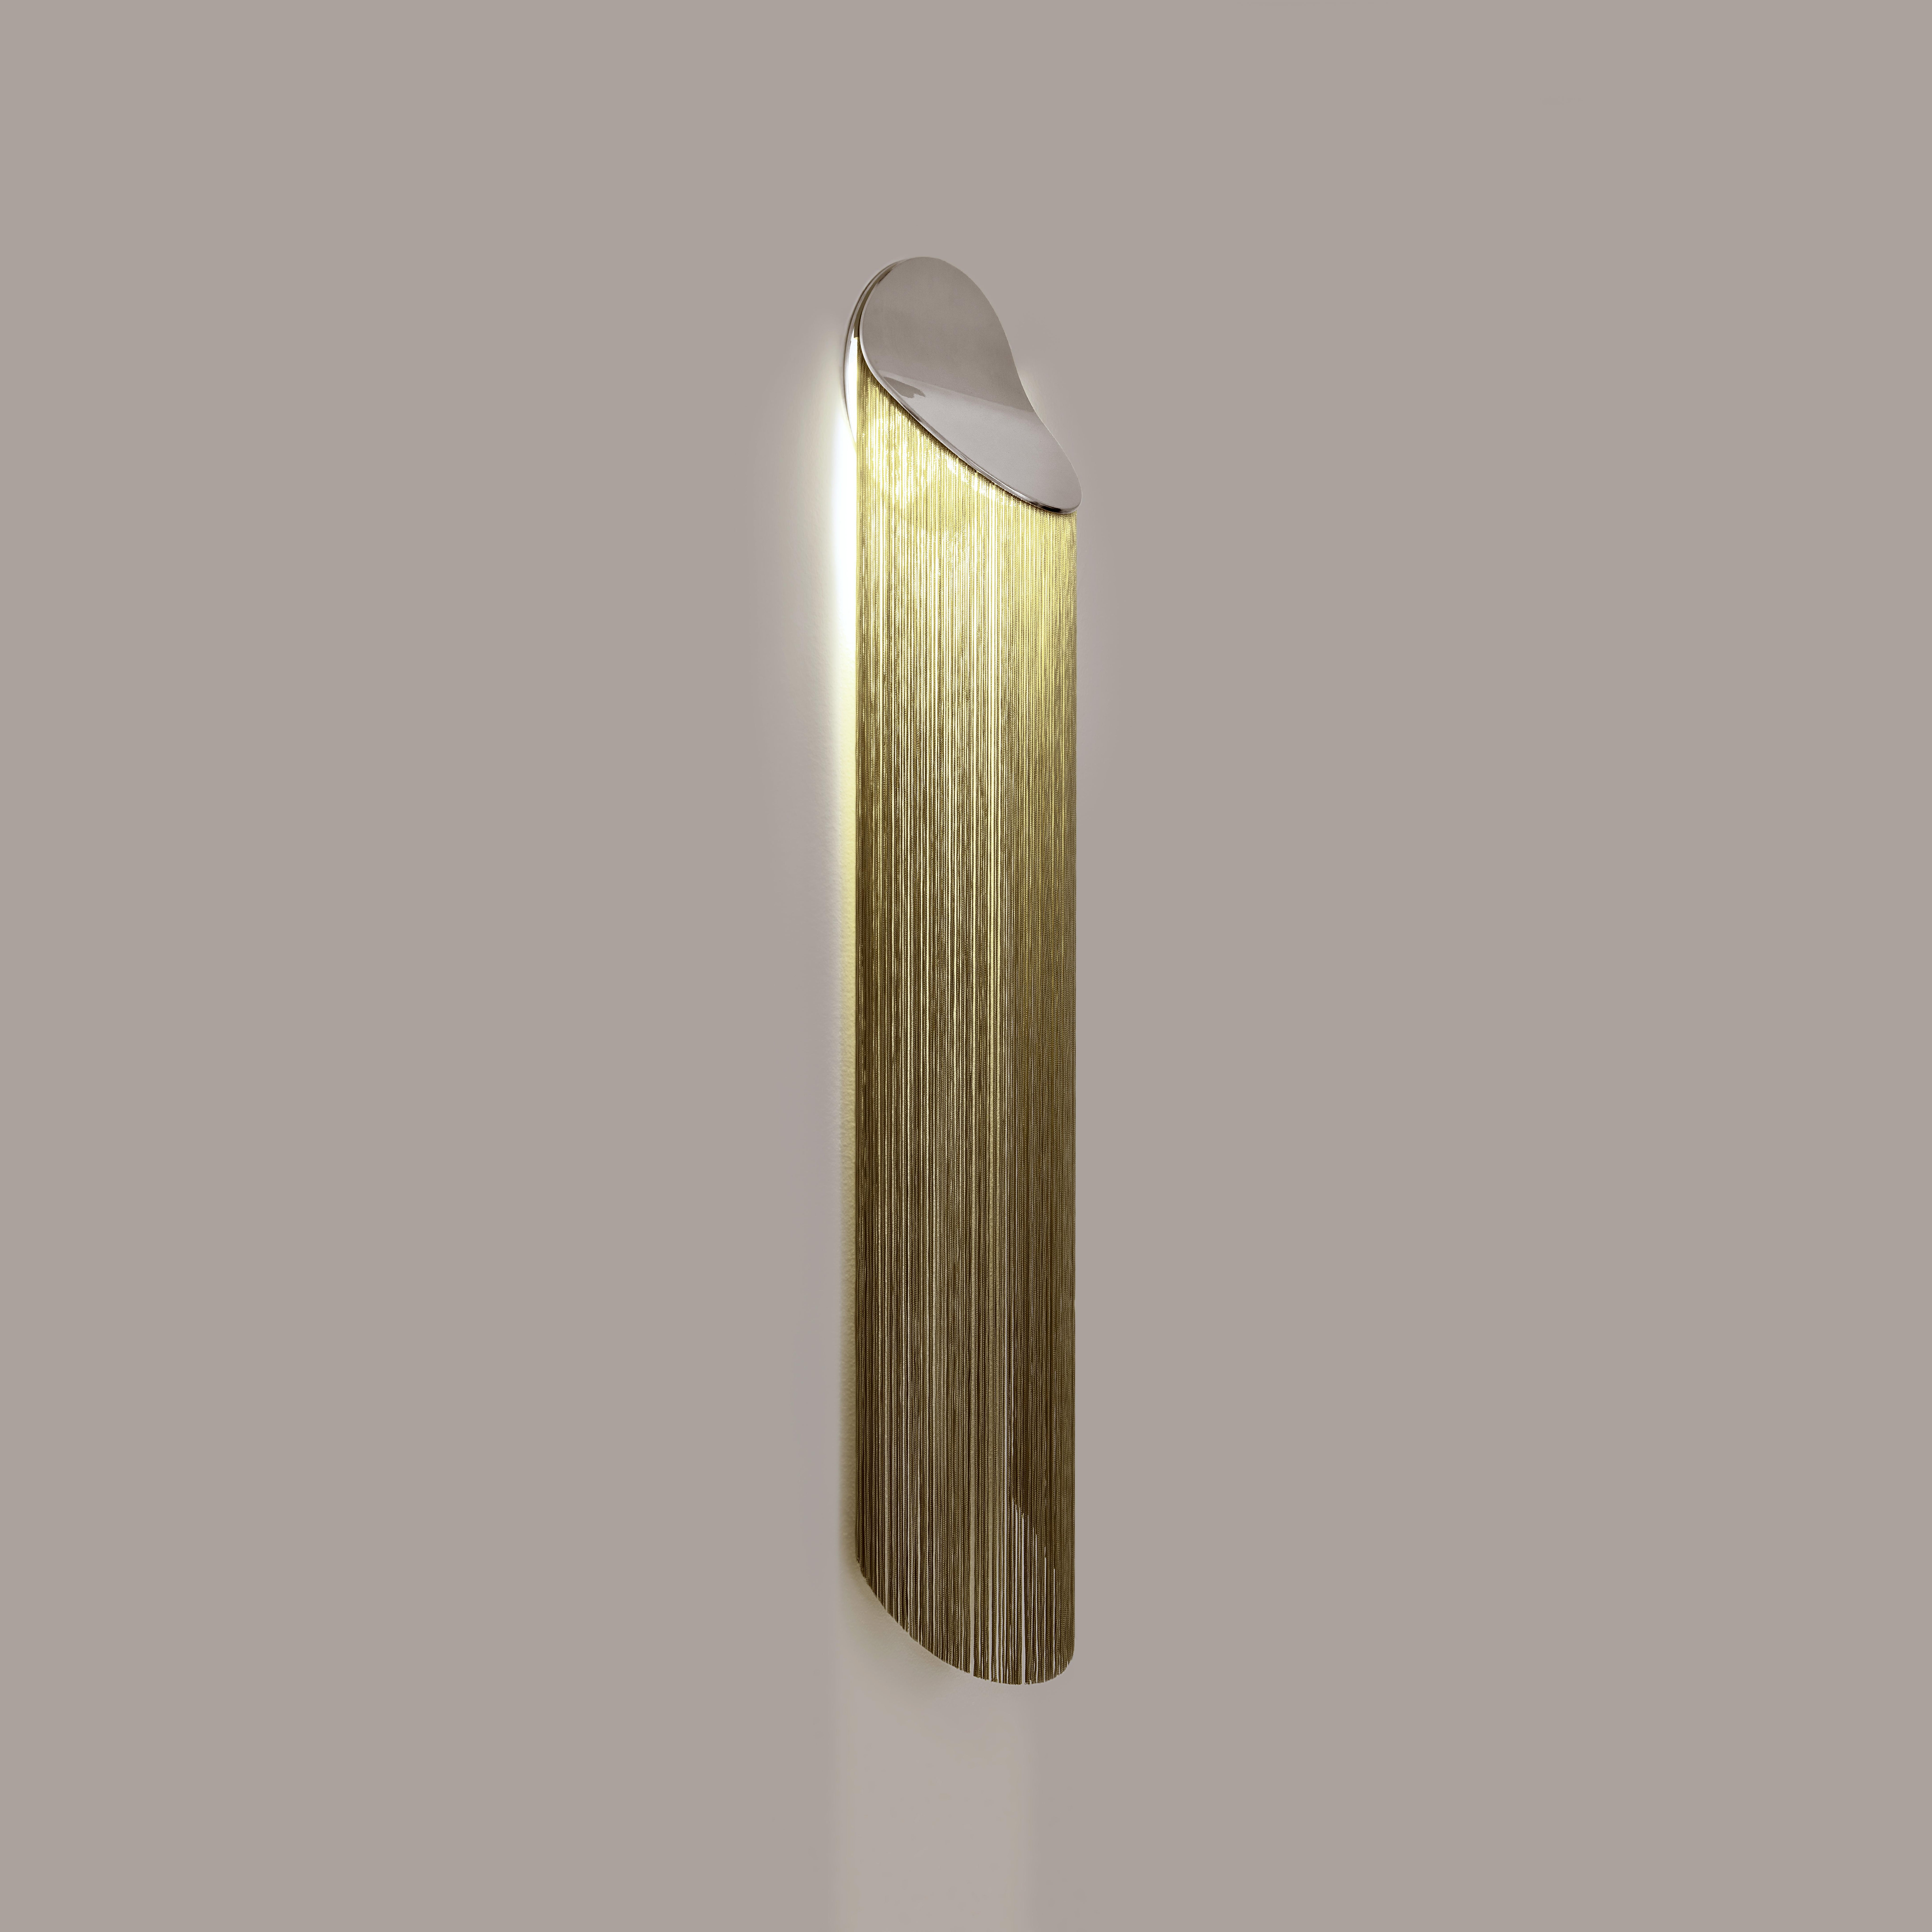 Cé Petite is a contemporary wall sconce with fringes and soft curves.

Cé jostles the obvious association between fringes and lighting by unveiling a classic revisited. The inspiration came from Cécrops, who would be the first native, the founder